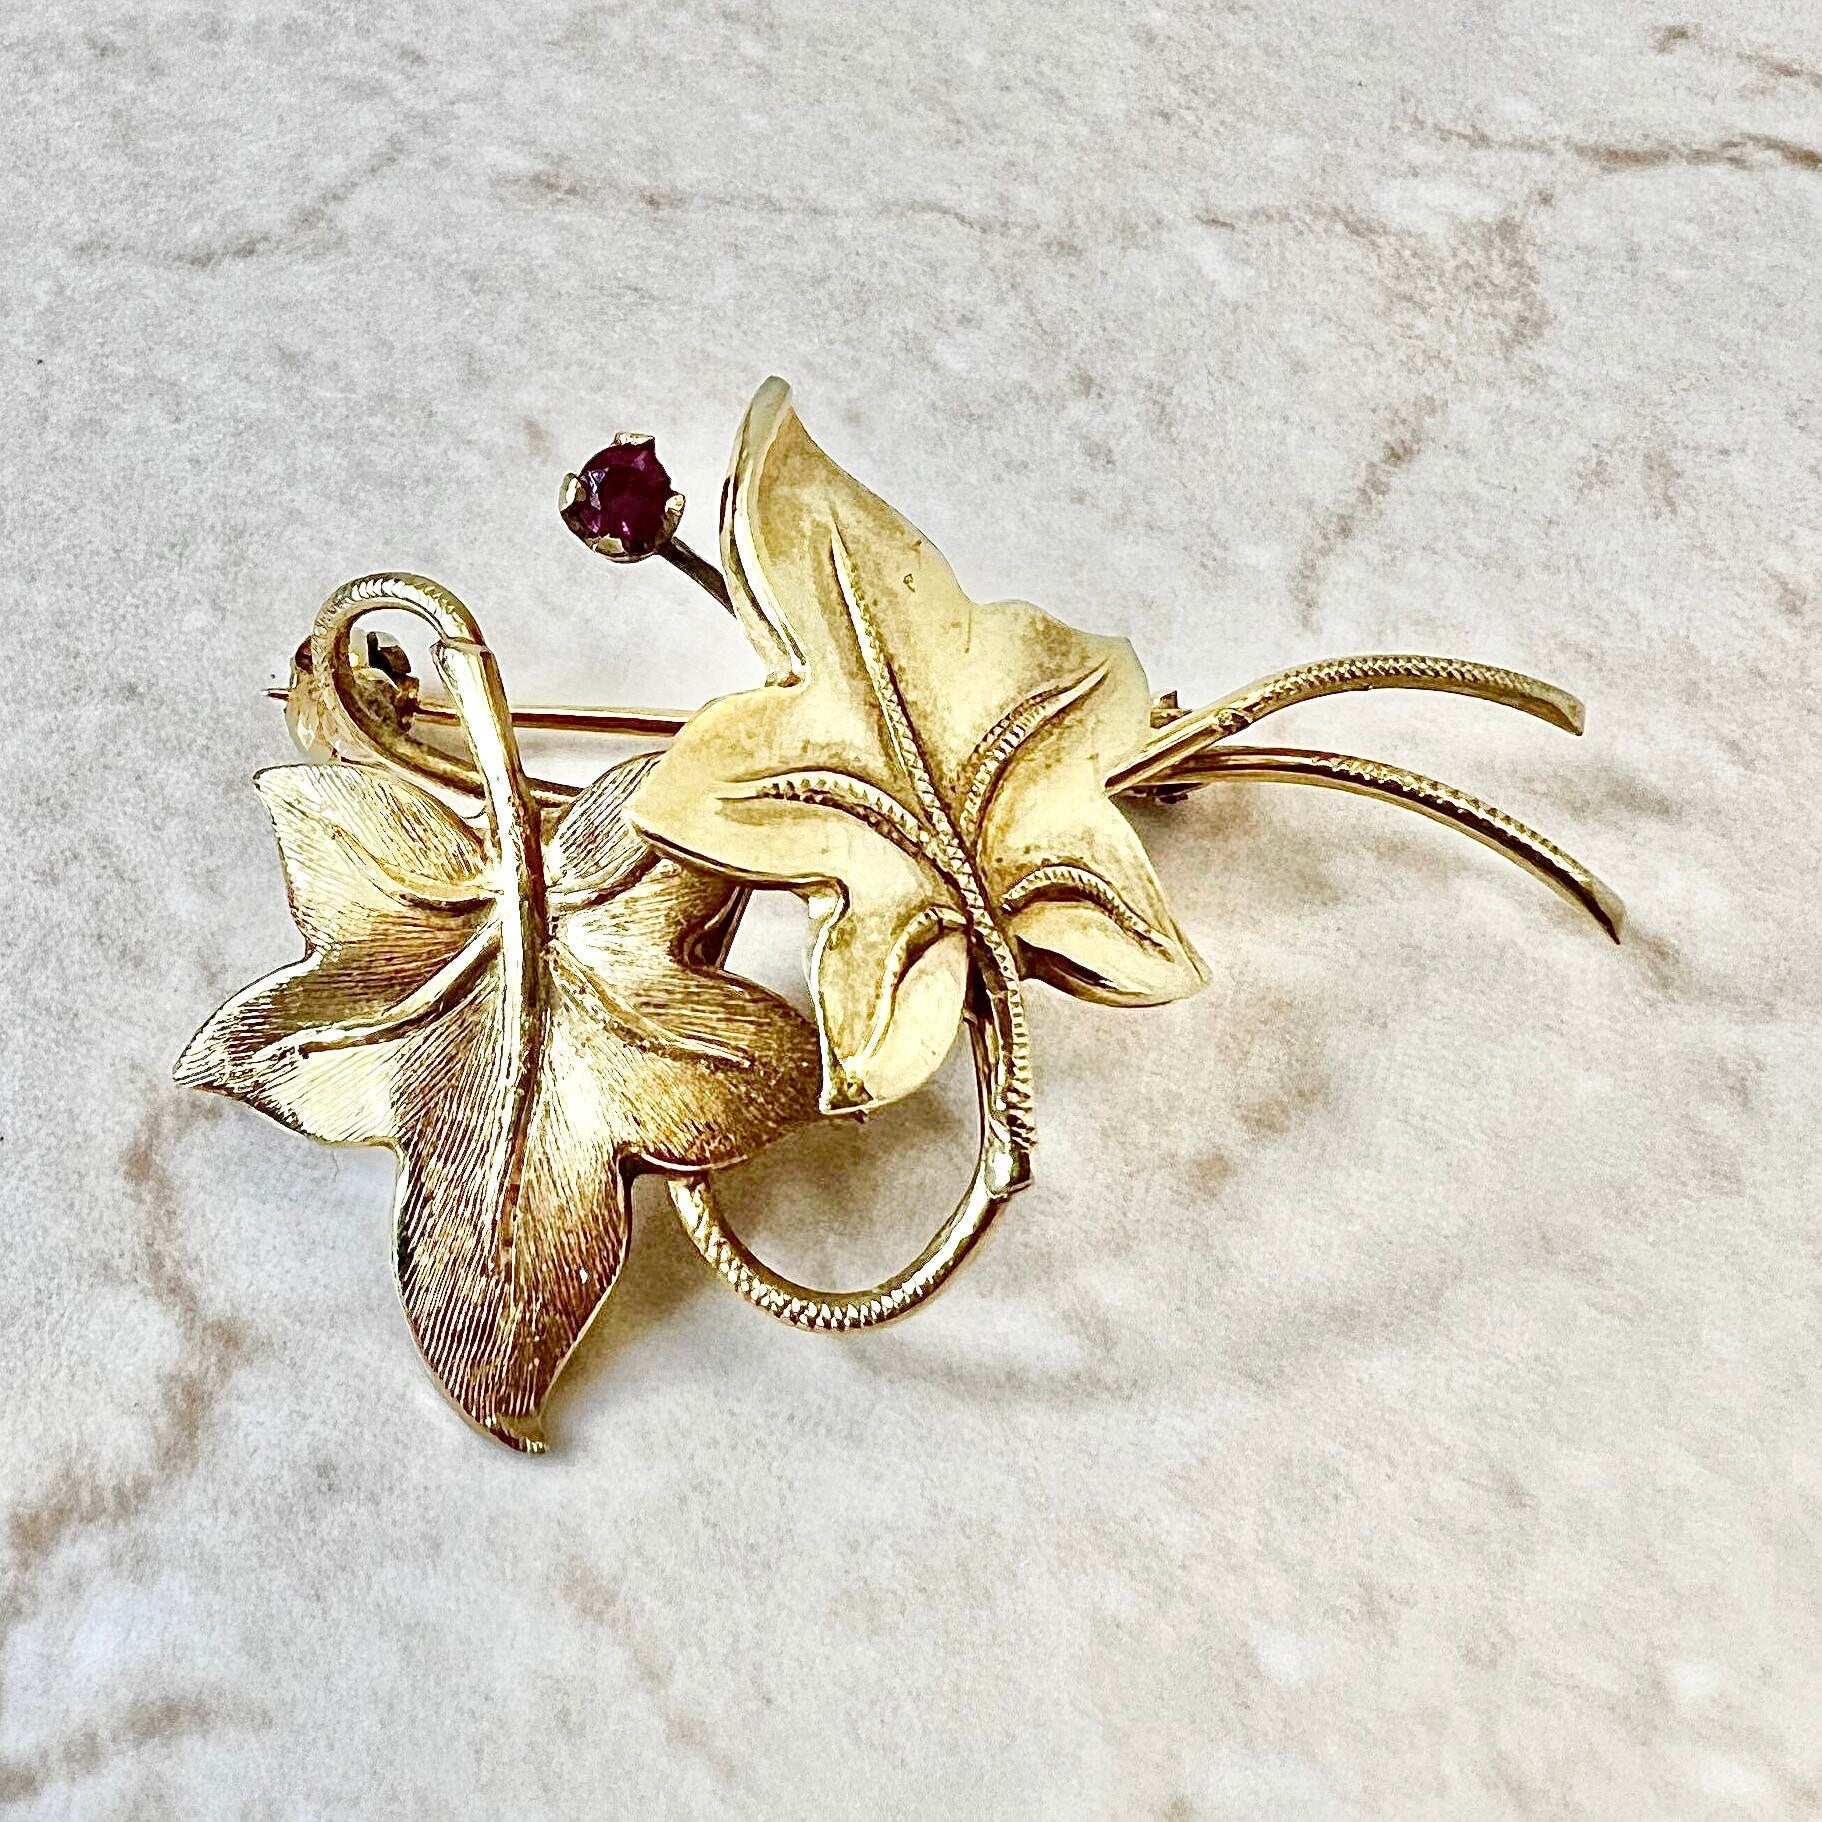 Vintage 18K Italian Synthetic Ruby Brooch - Yellow Gold Leaf Brooch - Ruby Pin - July Birthstone Gifts - Best Gifts For Her - Gold Brooch